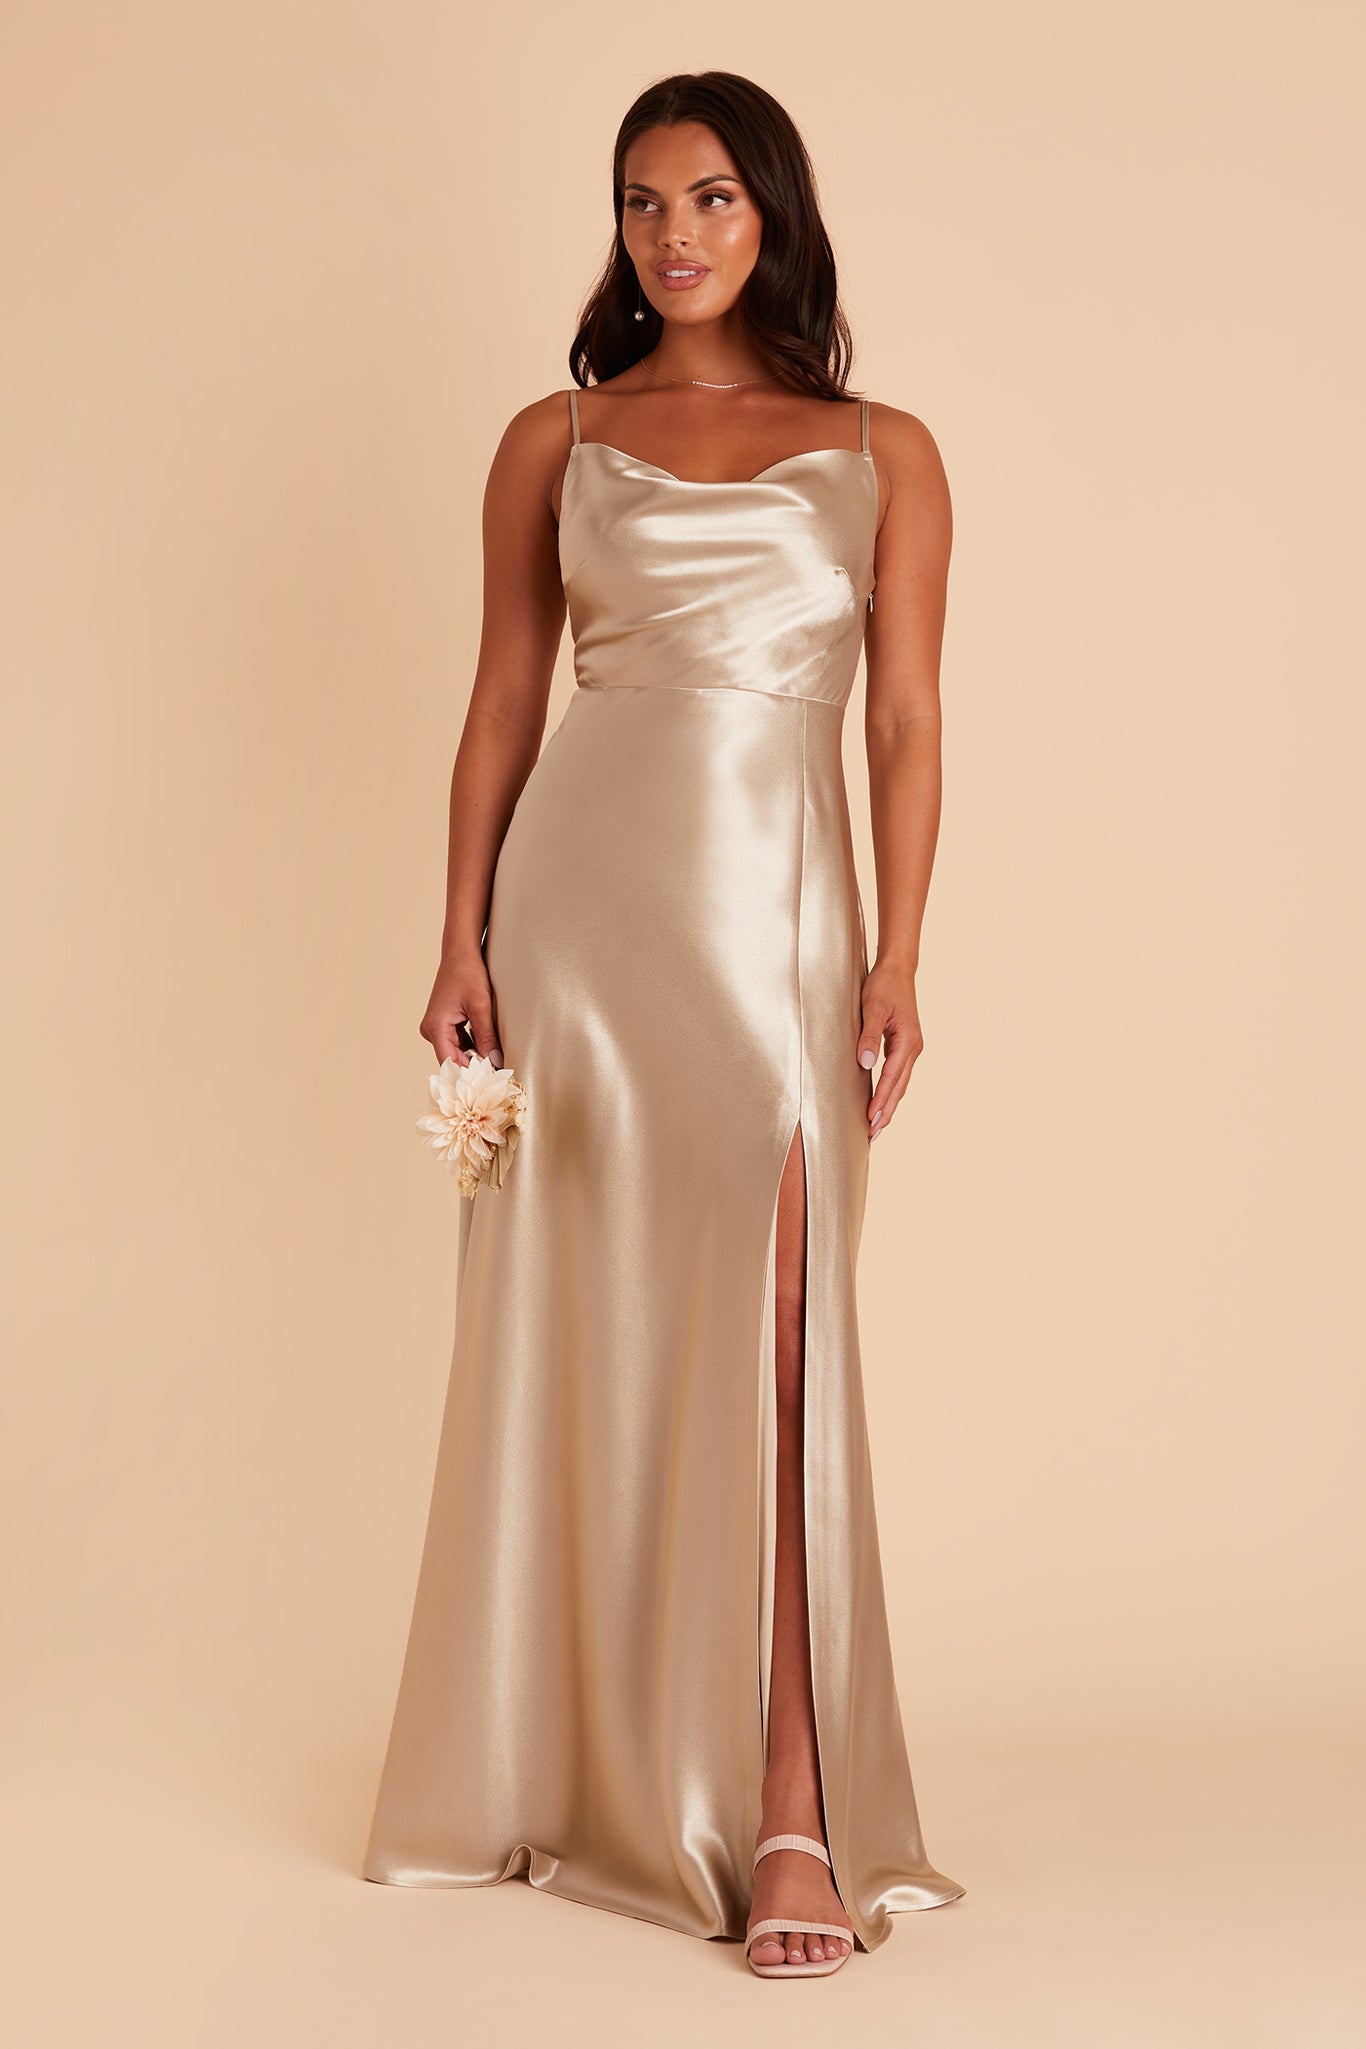 Front view of the Lisa Long Dress in neutral champagne satin shows a slender model with a medium skin tone wearing a lightly draped cowl neck bodice with spaghetti straps and a floor length flared dress with a slit. 